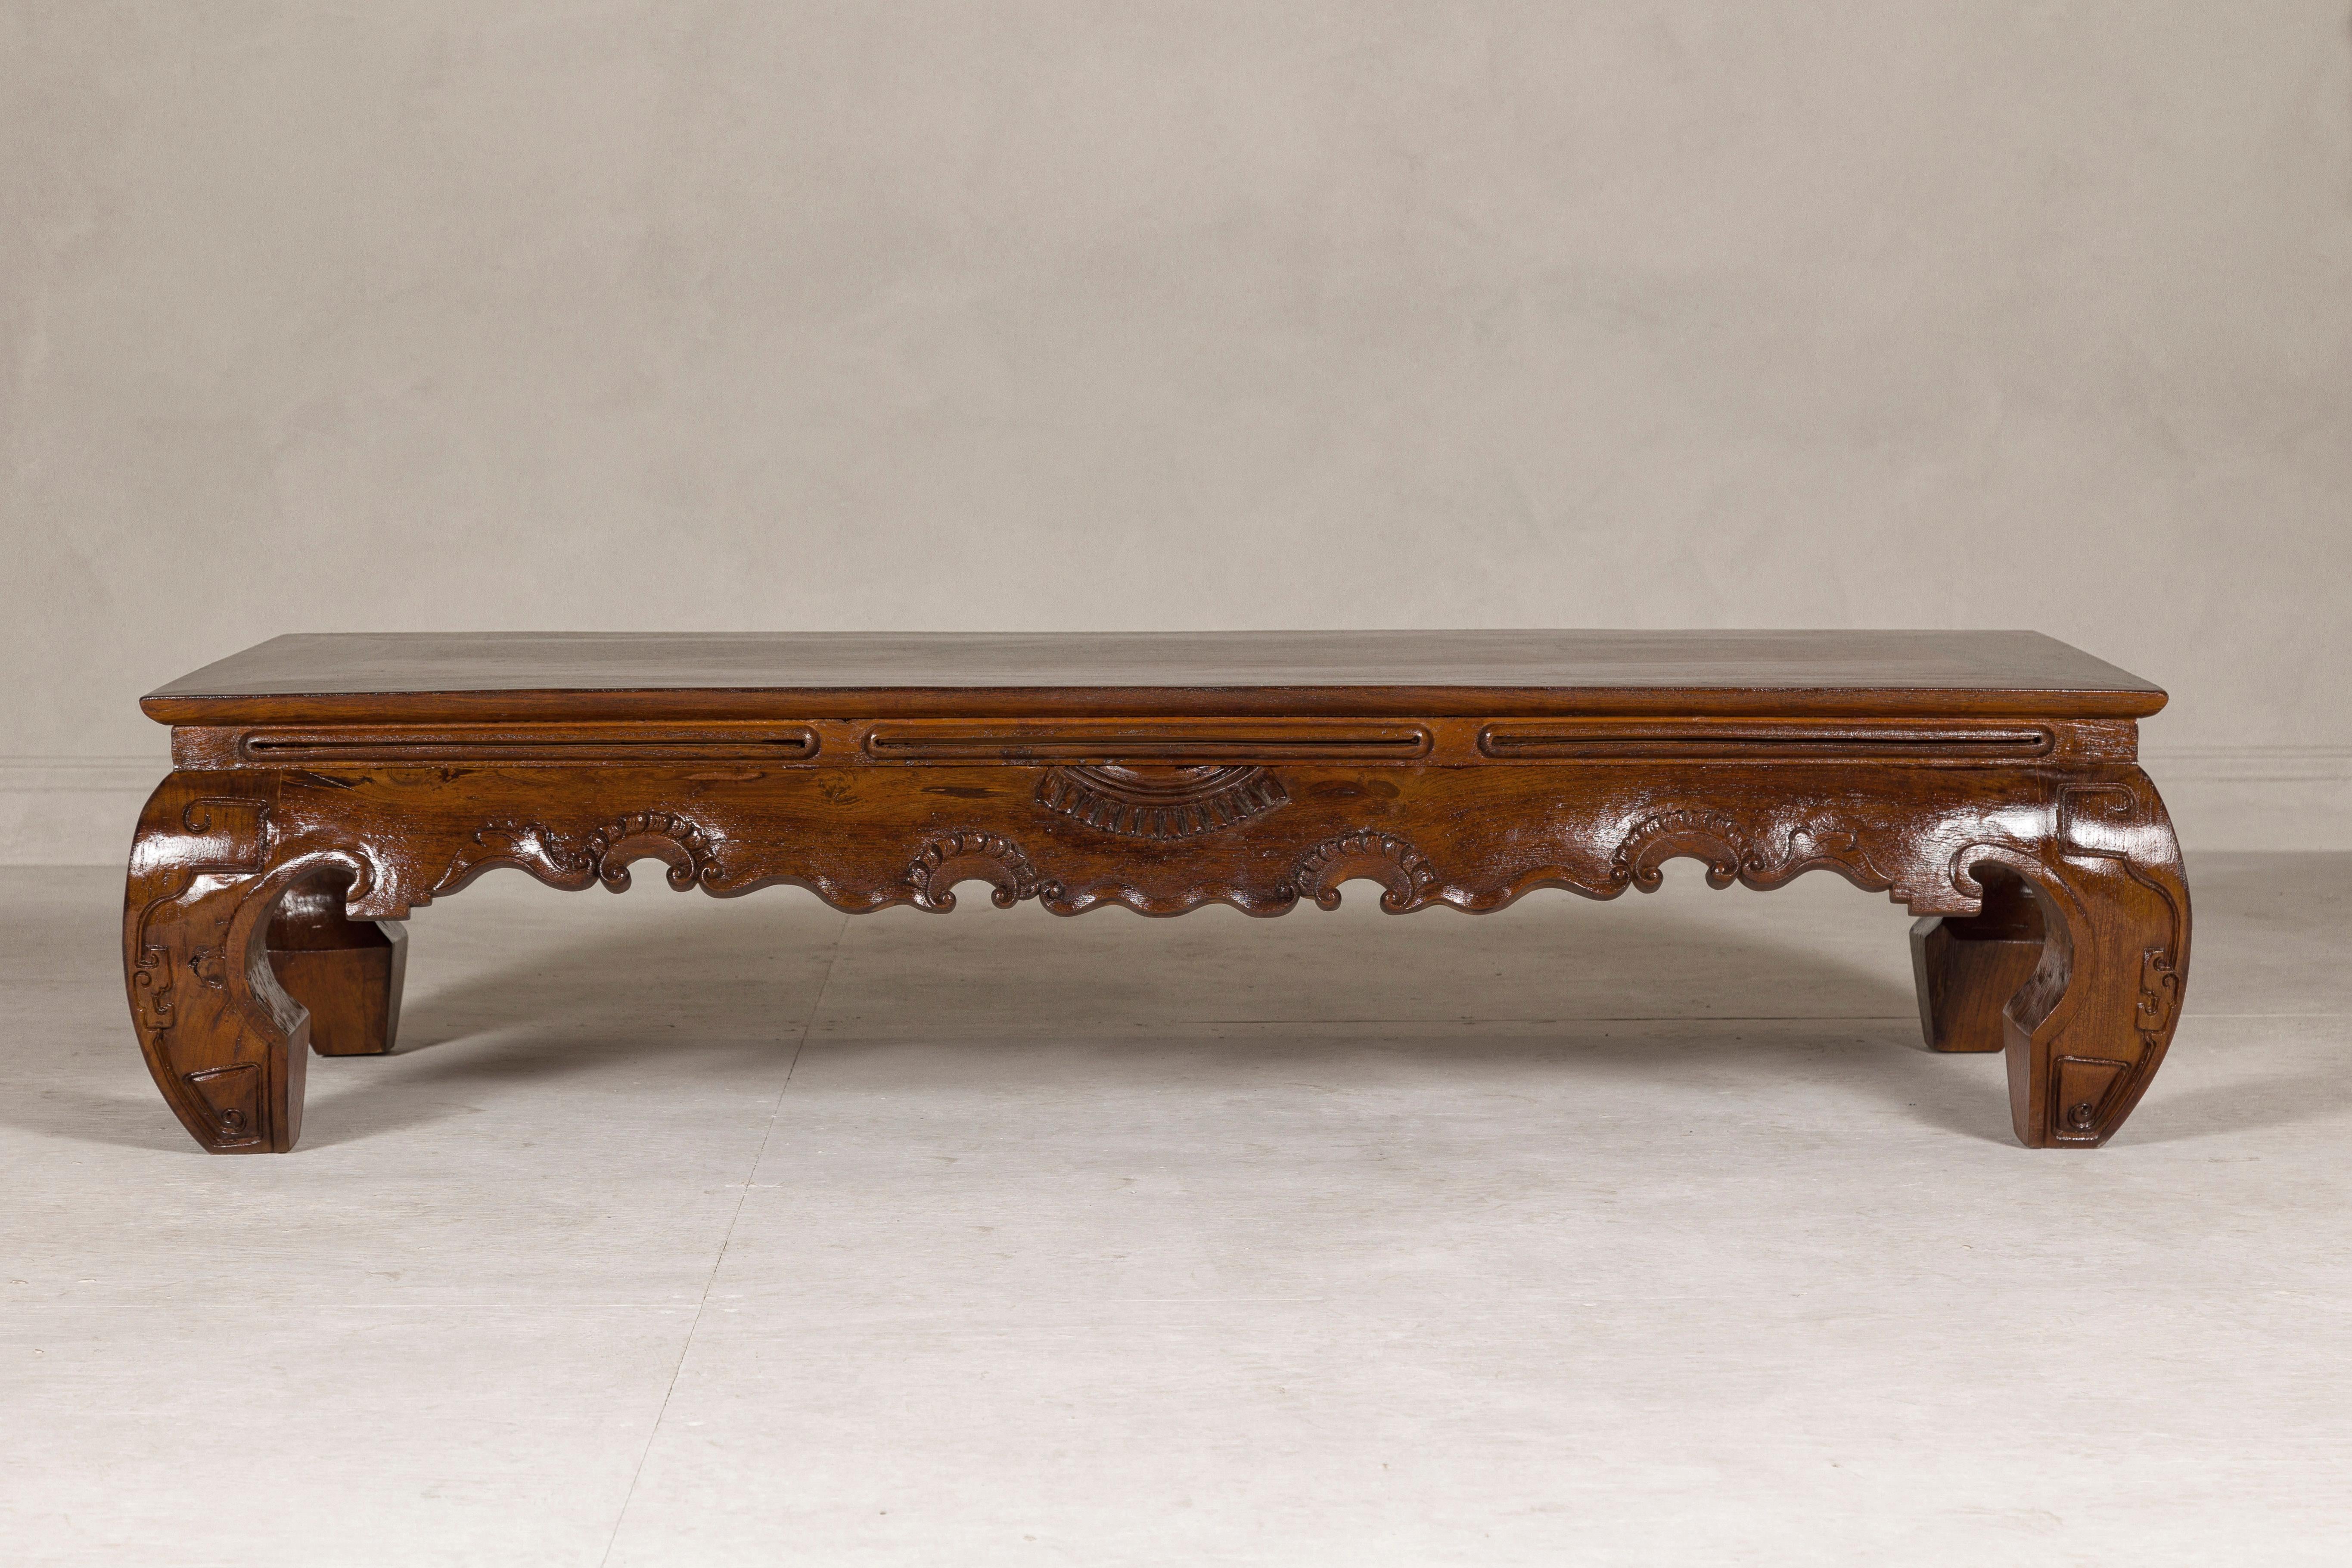 19th Century Lacquered Coffee Table with Hand-Carved Apron and Chow Legs In Good Condition For Sale In Yonkers, NY